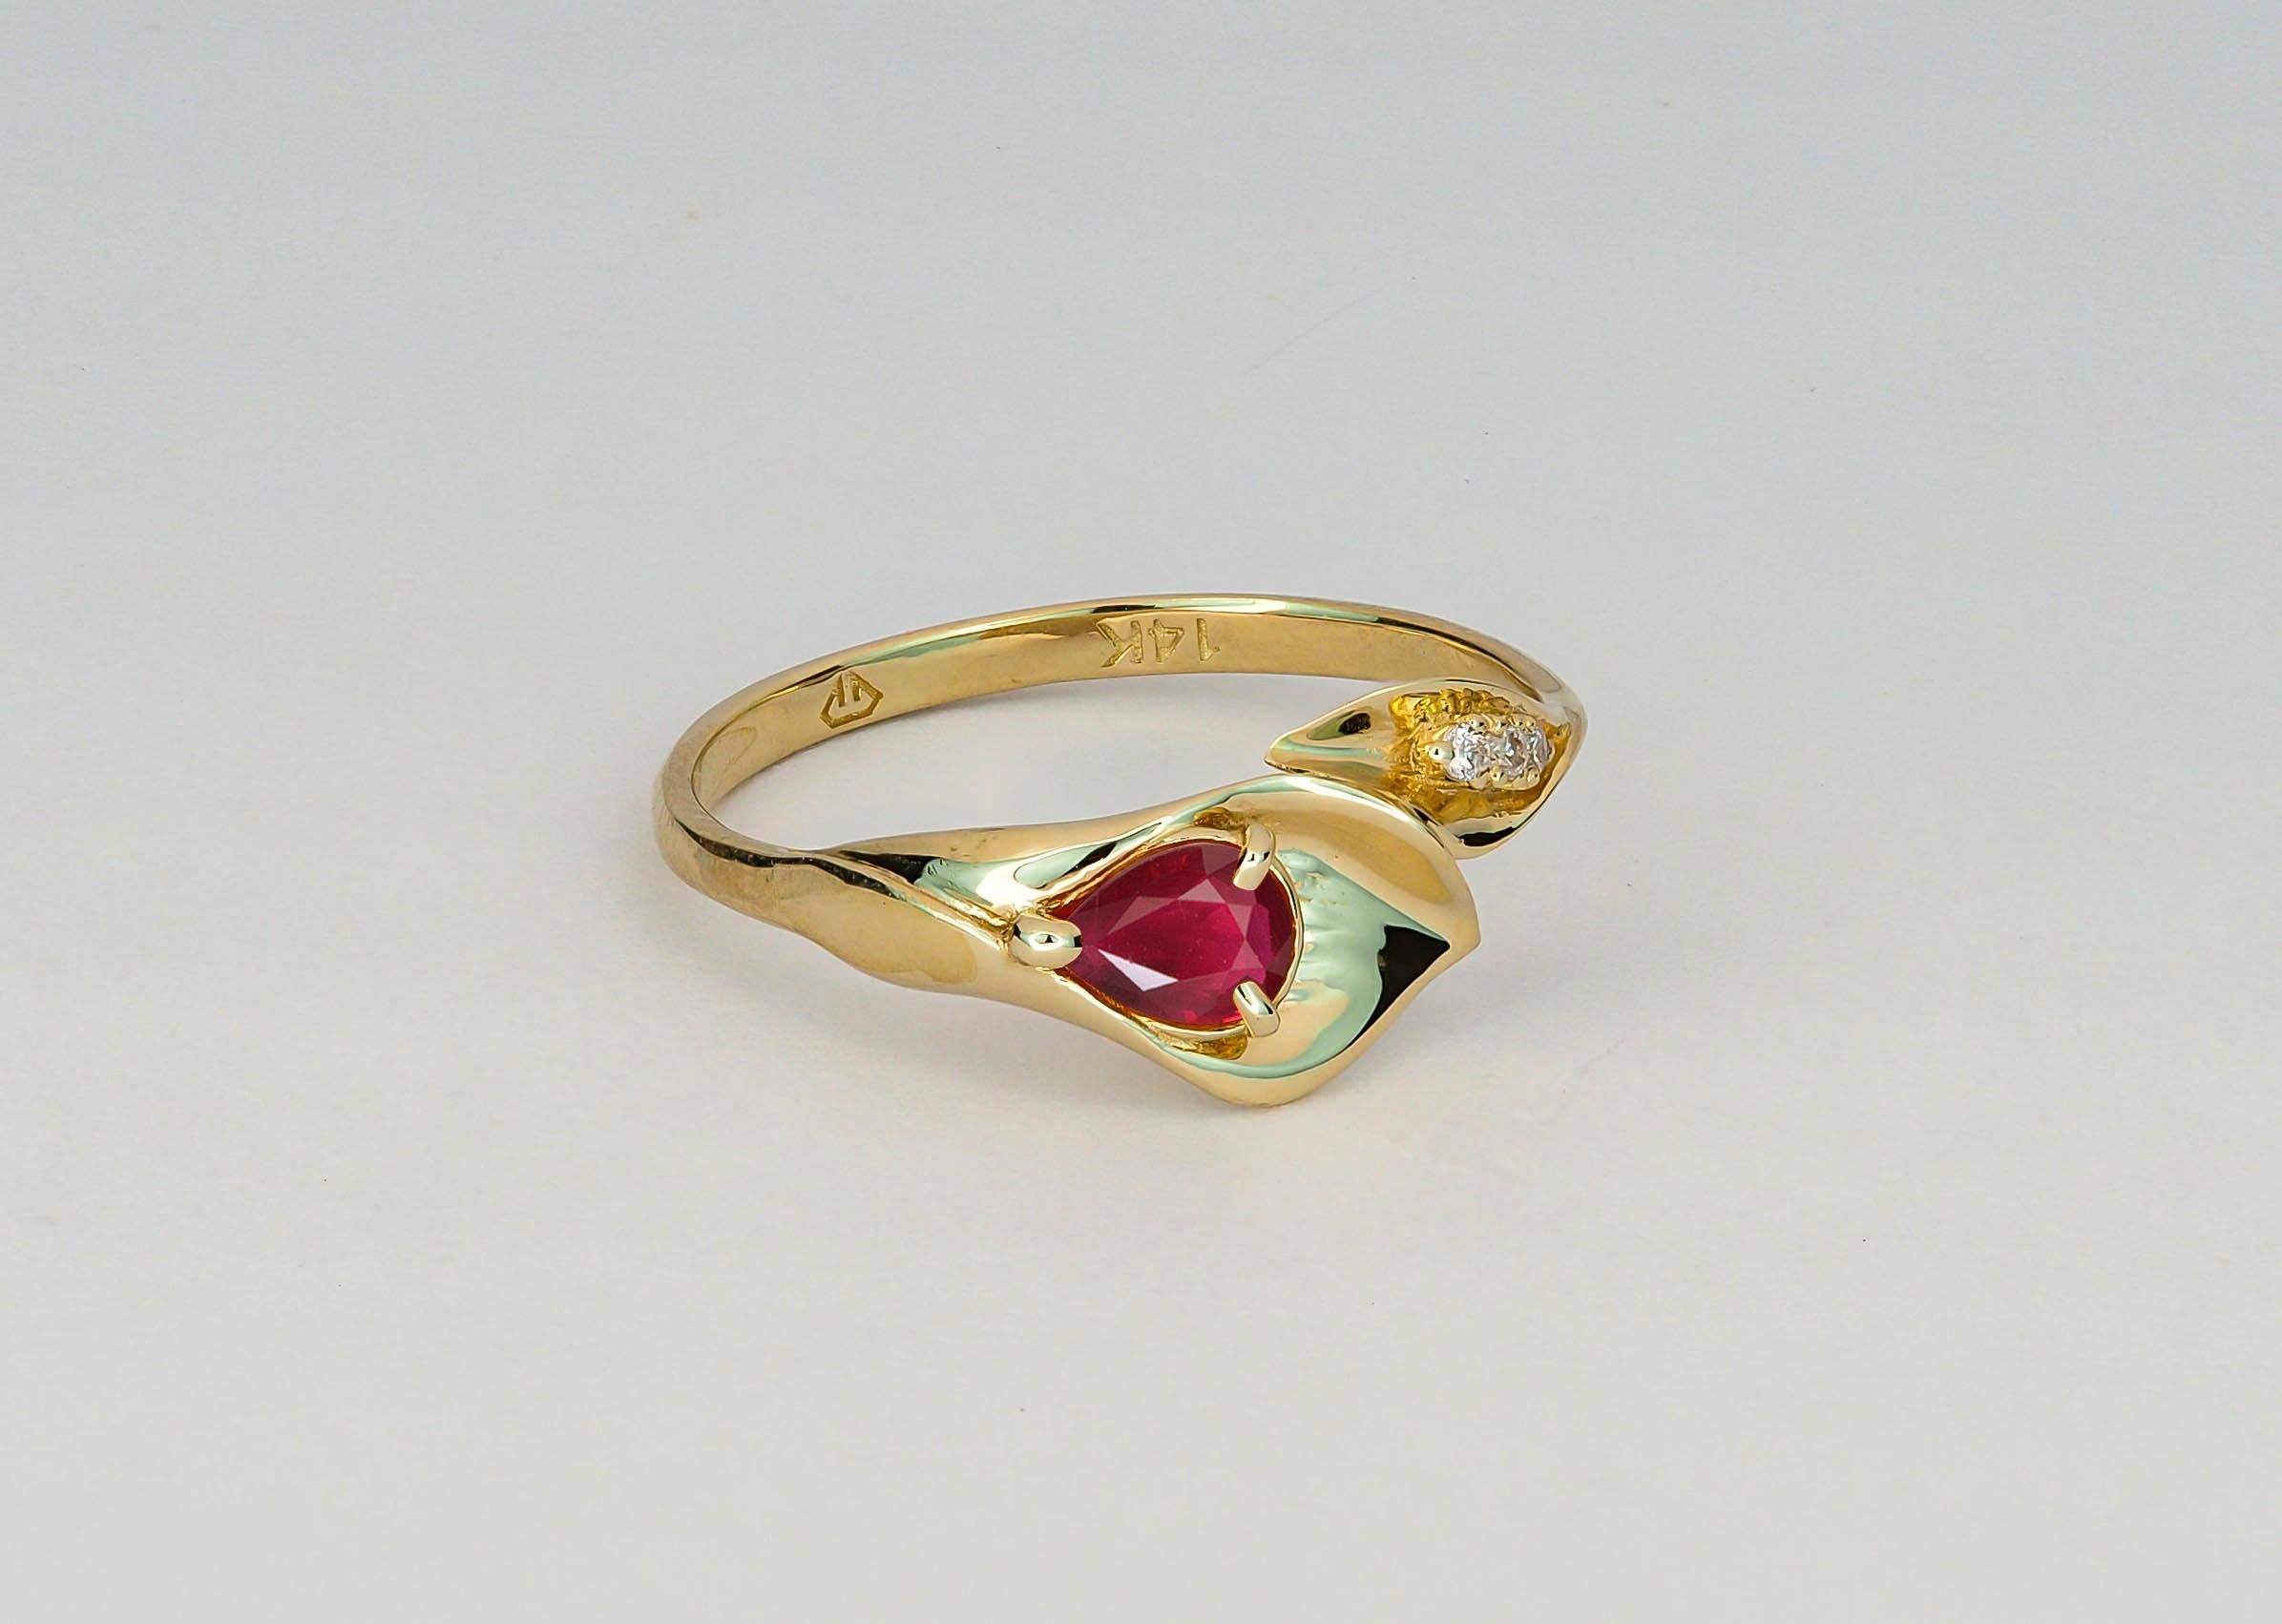 For Sale:  Lily Calla Gold Ring, 14 Karat Gold Ring with Ruby and Diamonds! 6